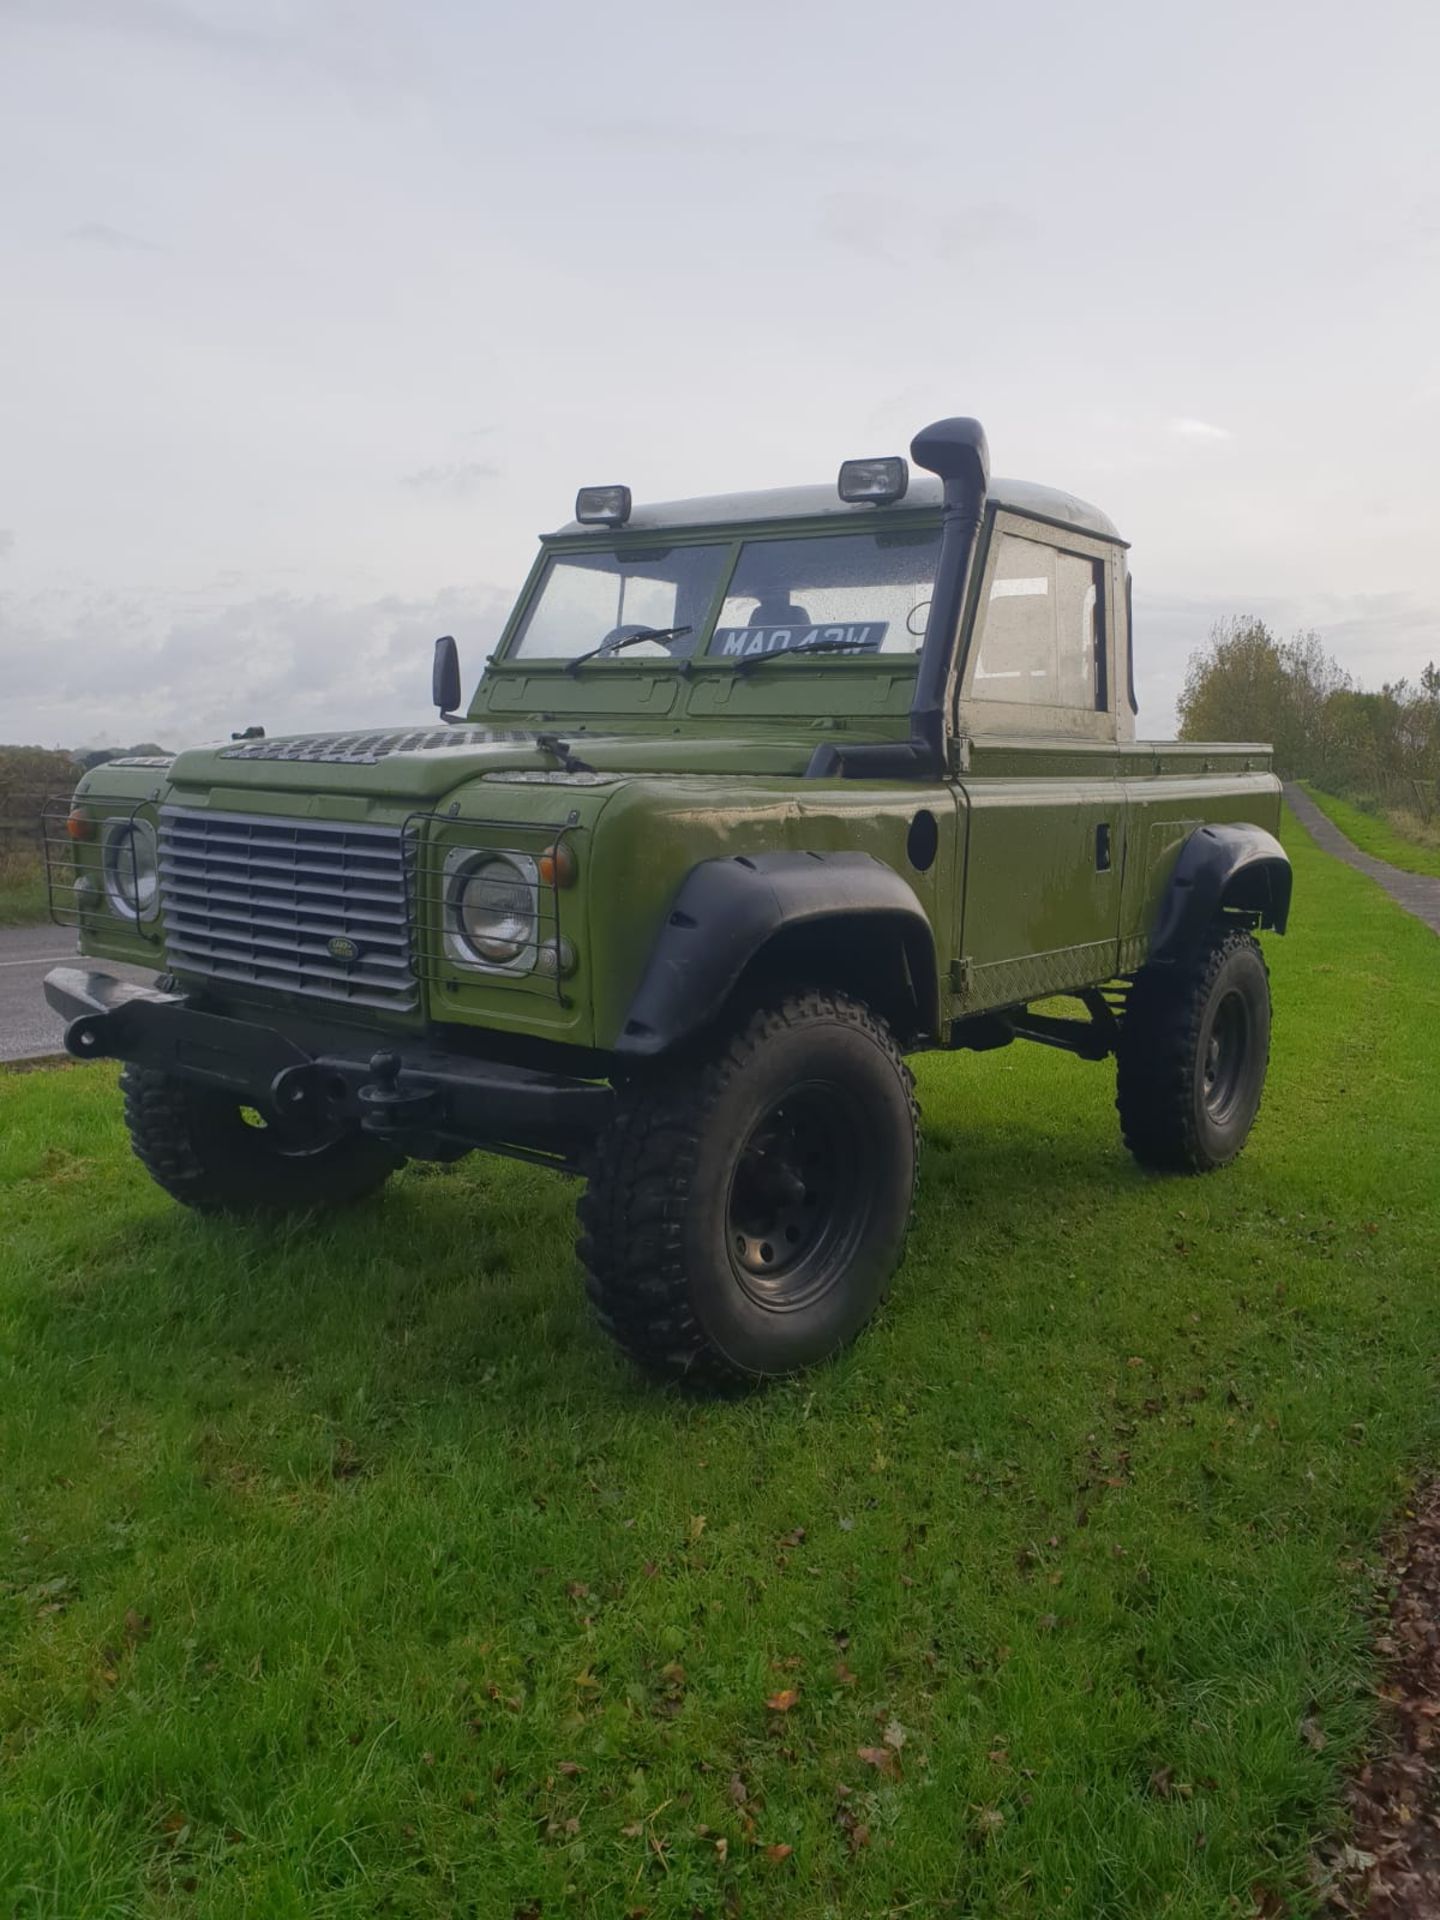 1981 LAND ROVER DEFENDER SERIES 3 TAX EXEMPT, FITTED WITH A 300TDI ENGINE, 4 INCH LIFT KIT *NO VAT* - Image 4 of 11